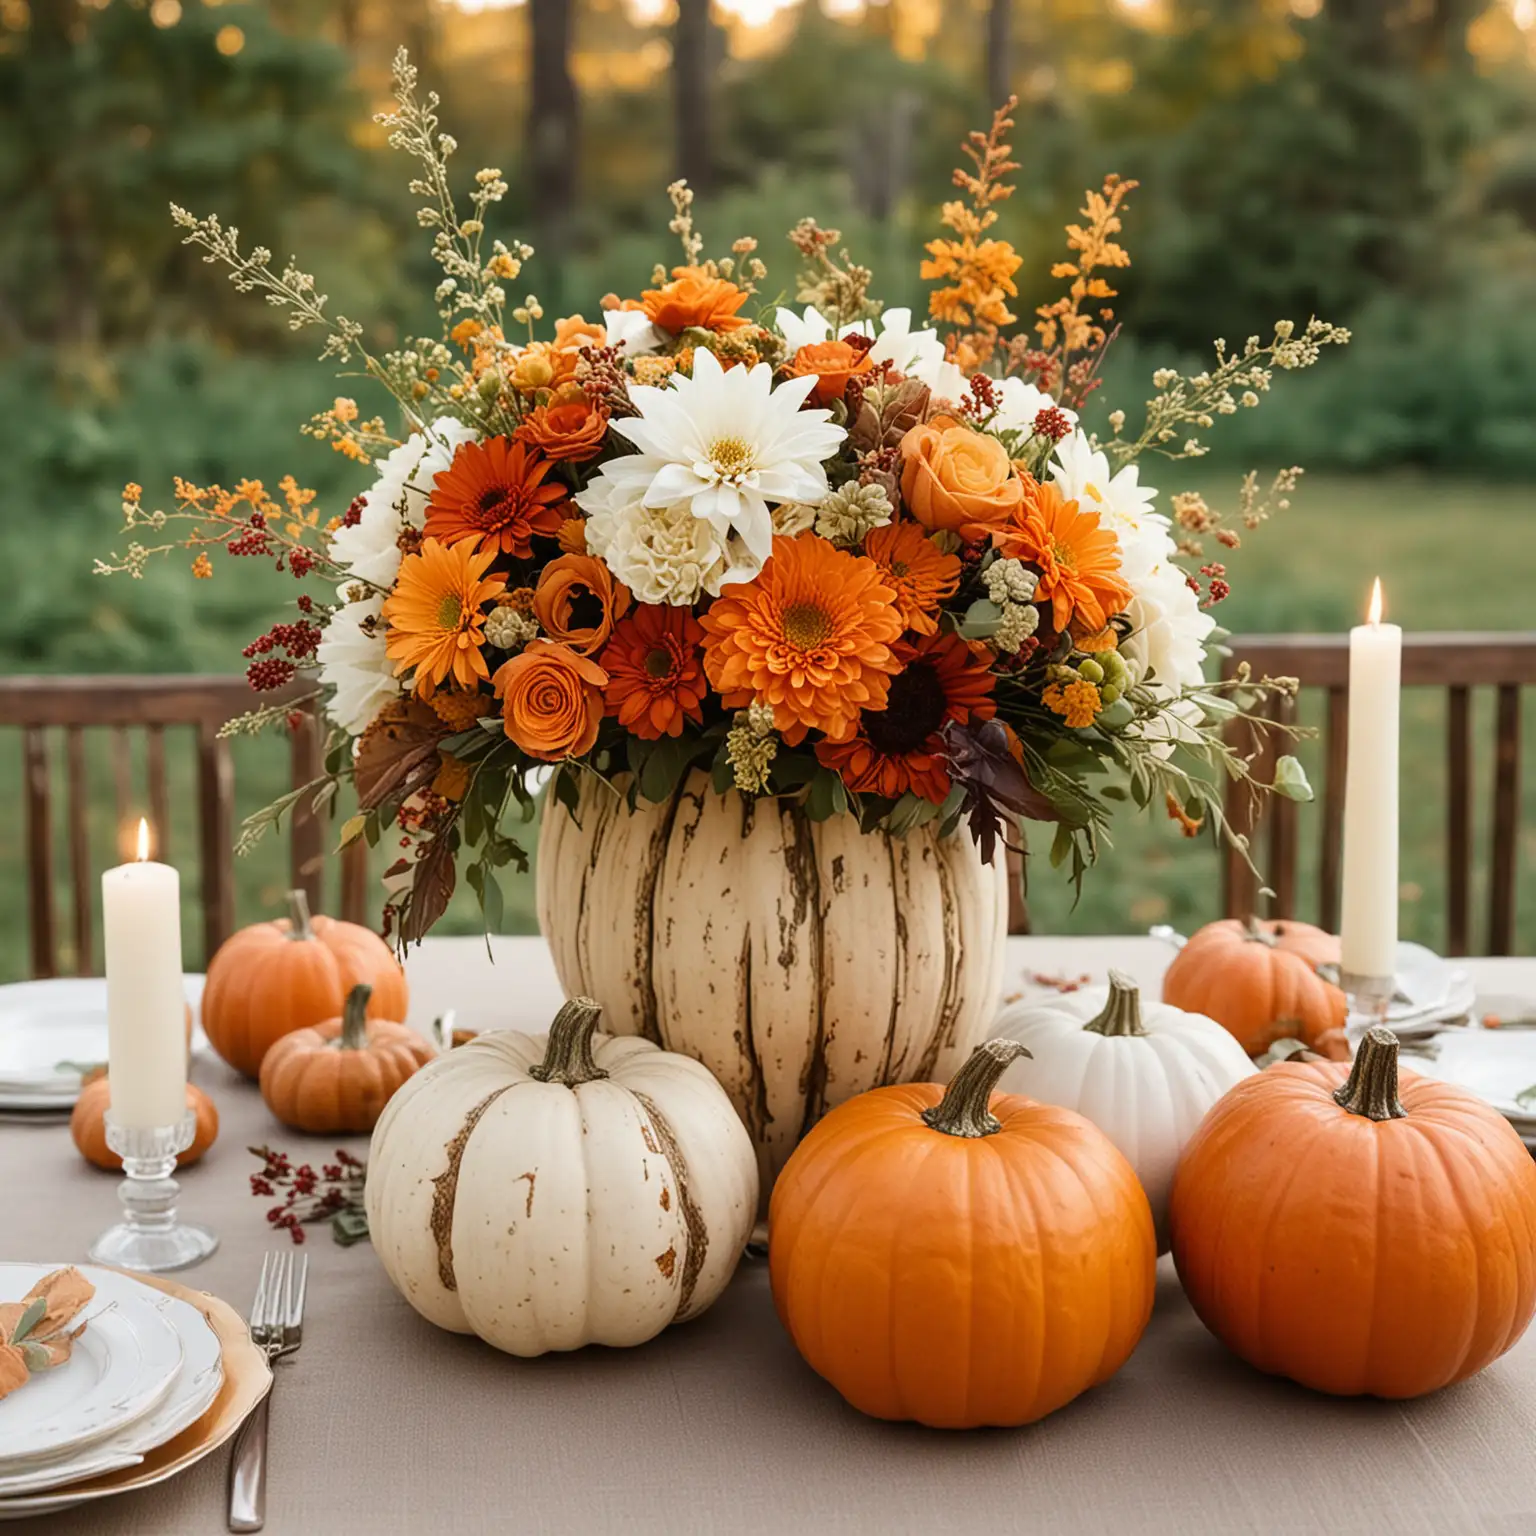 simple fall floral wedding centerpiece with using hollowed-out pumpkins as vases filled with fall flowers